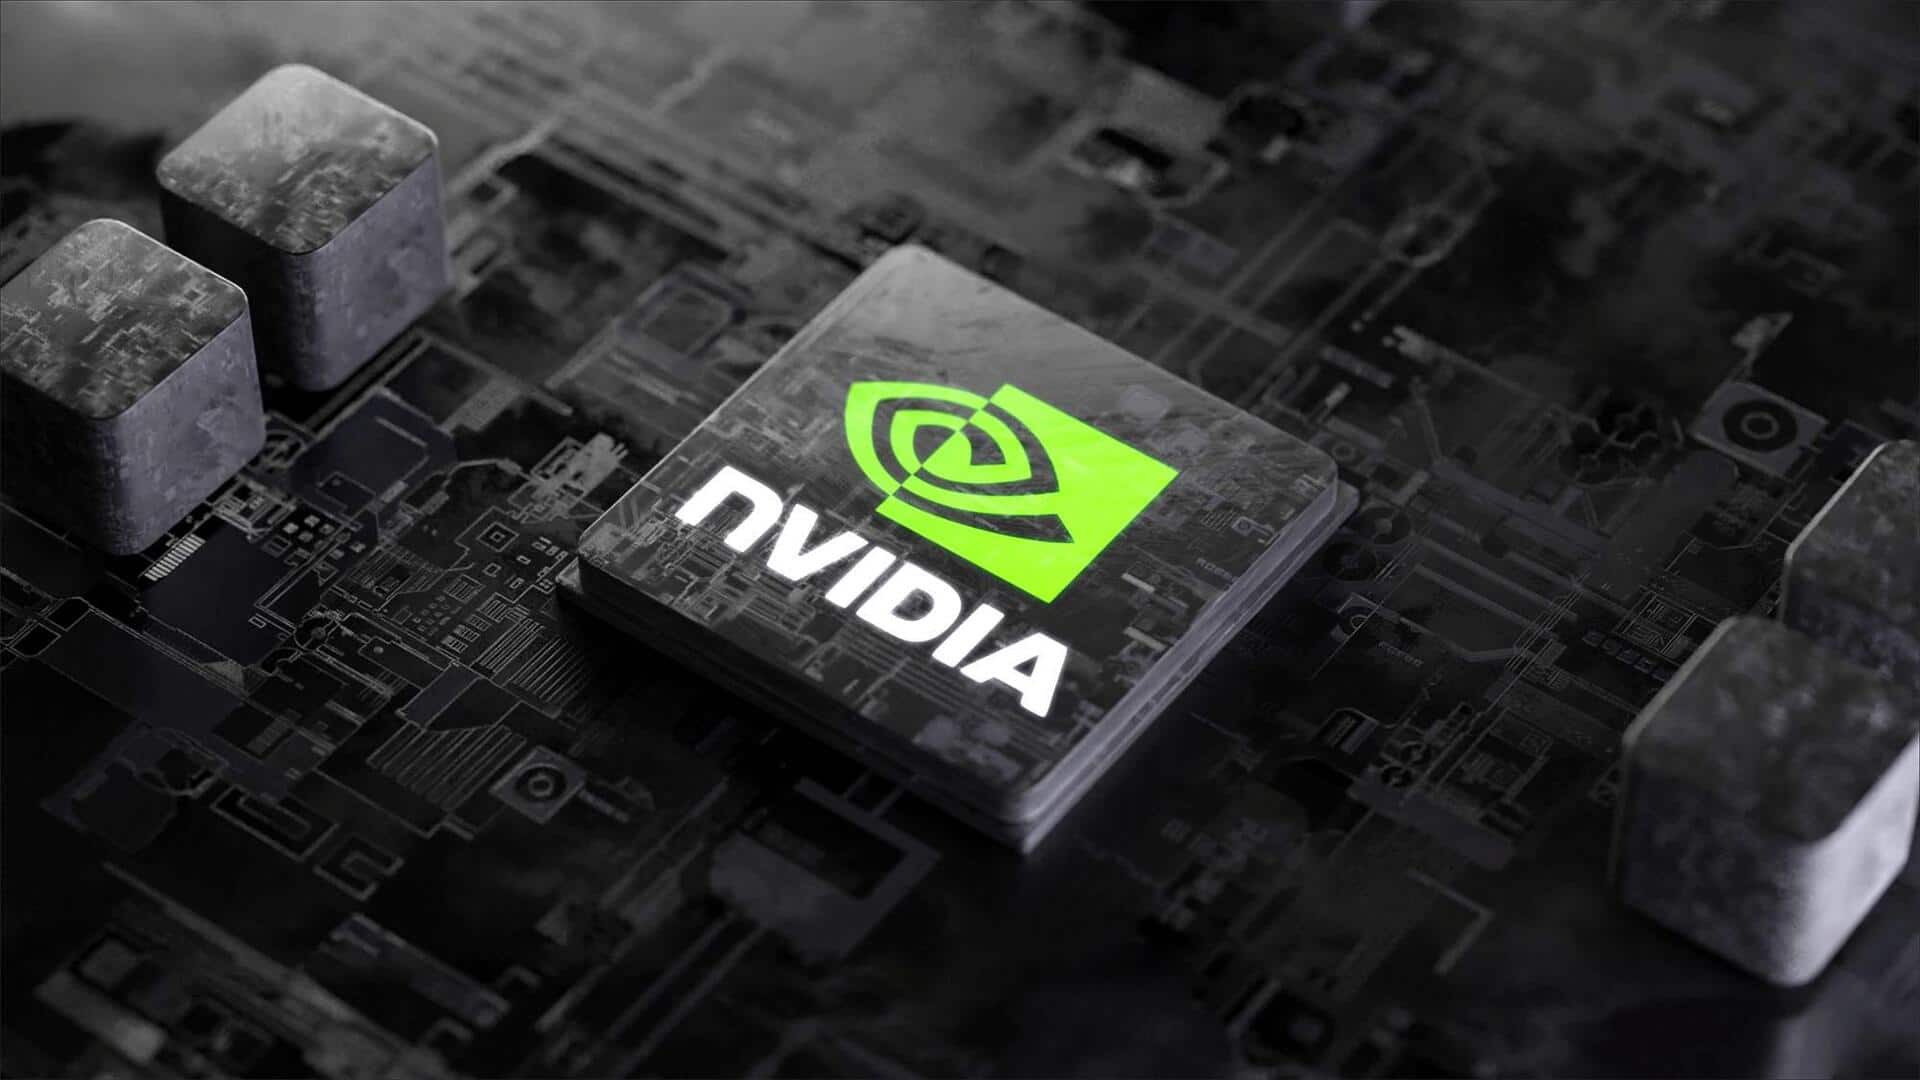 NVIDIA launches less capable gaming chip for Chinese customers